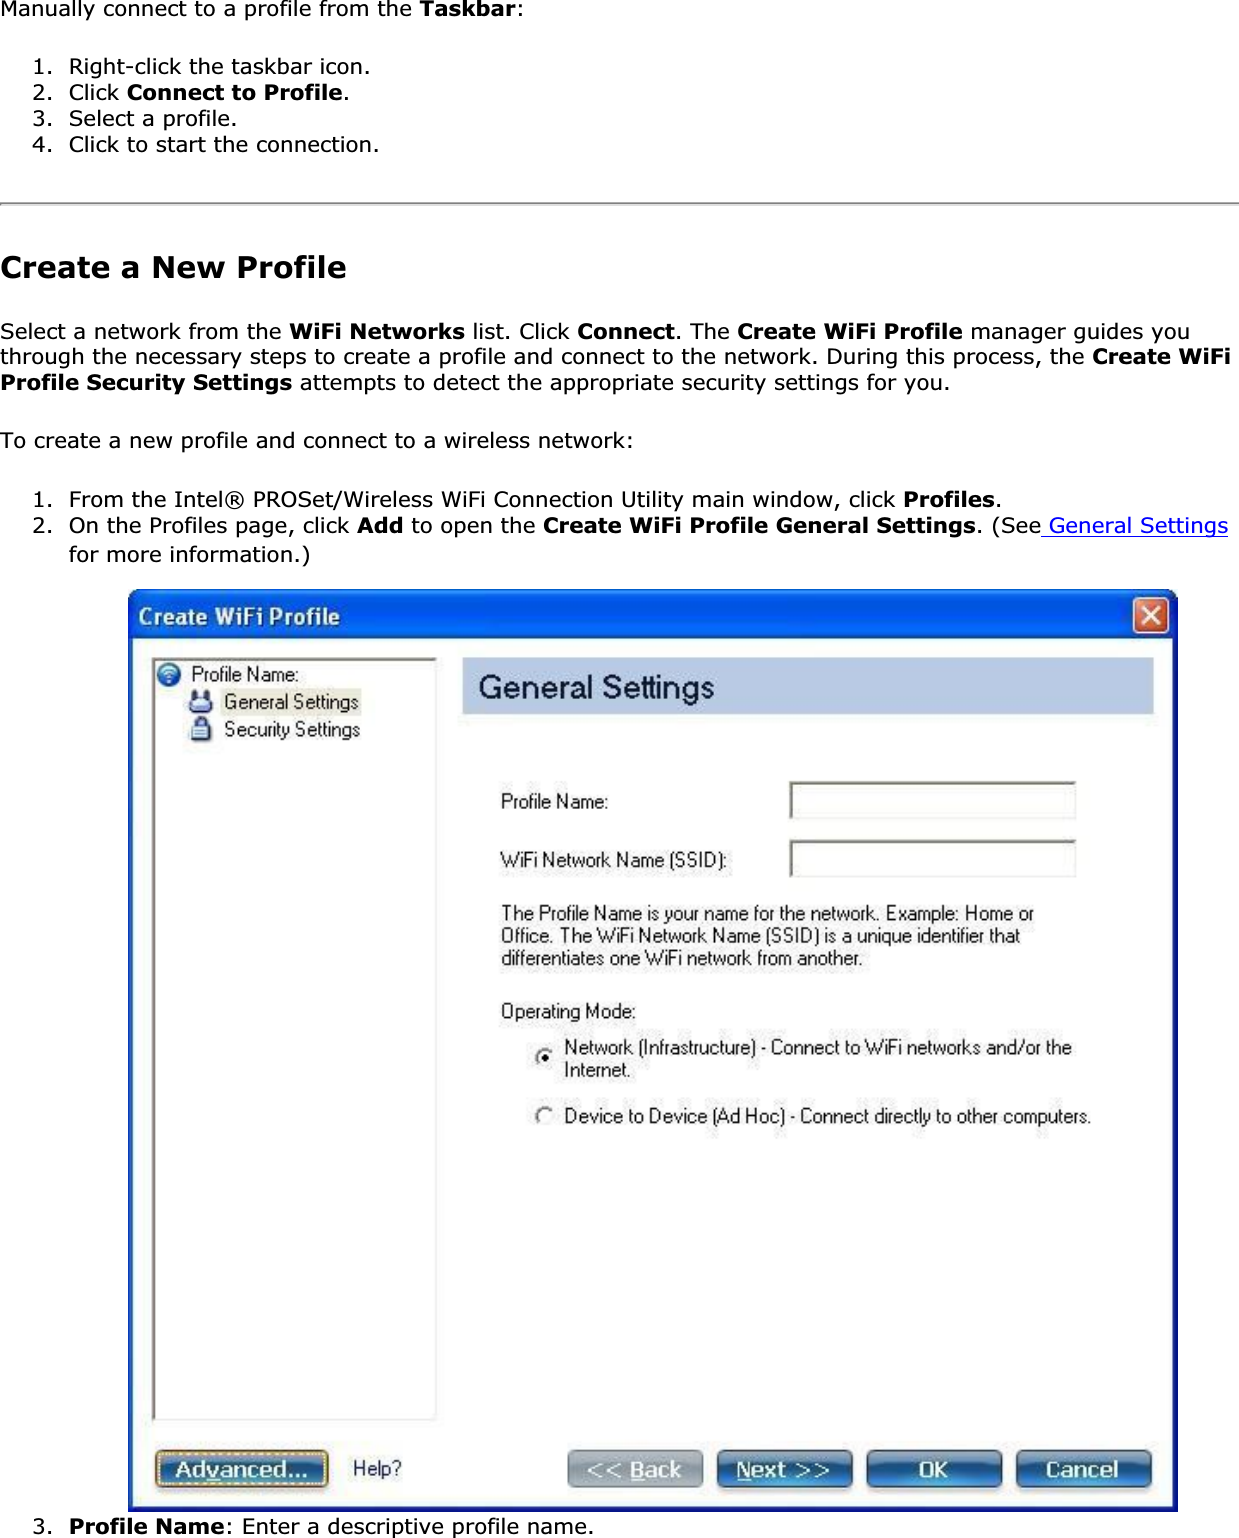 Manually connect to a profile from the Taskbar:1. Right-click the taskbar icon.2. Click Connect to Profile.3. Select a profile.4. Click to start the connection.Create a New ProfileSelect a network from the WiFi Networks list. Click Connect. The Create WiFi Profile manager guides you through the necessary steps to create a profile and connect to the network. During this process, the Create WiFi Profile Security Settings attempts to detect the appropriate security settings for you. To create a new profile and connect to a wireless network: 1. From the Intel® PROSet/Wireless WiFi Connection Utility main window, click Profiles.2. On the Profiles page, click Add to open the Create WiFi Profile General Settings. (See General Settingsfor more information.)3. Profile Name: Enter a descriptive profile name.